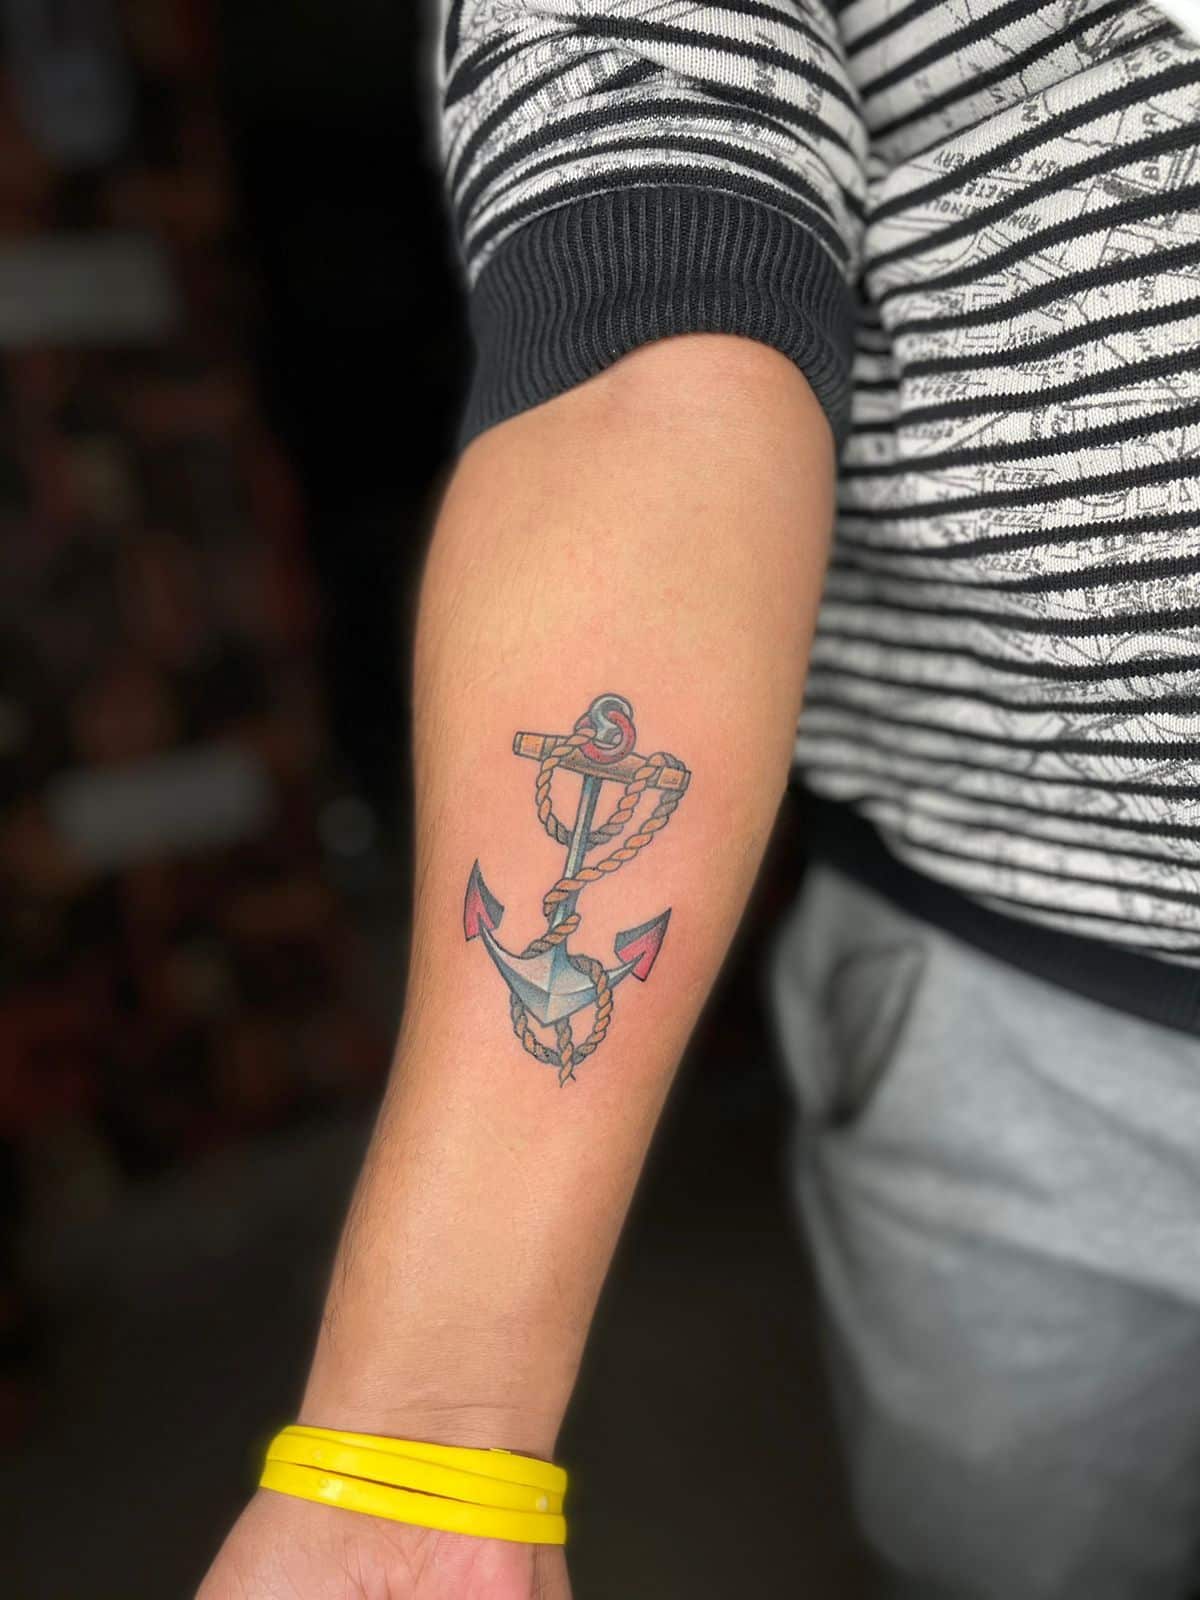 Buy Anchor Temporary Tattoo, Anchor Tattoo, Anchor With Aquarius Tattoo,  Fake Tattoo, Meaningful Tattoo, Symbol Tattoo, Hand Draw Design Online in  India - Etsy